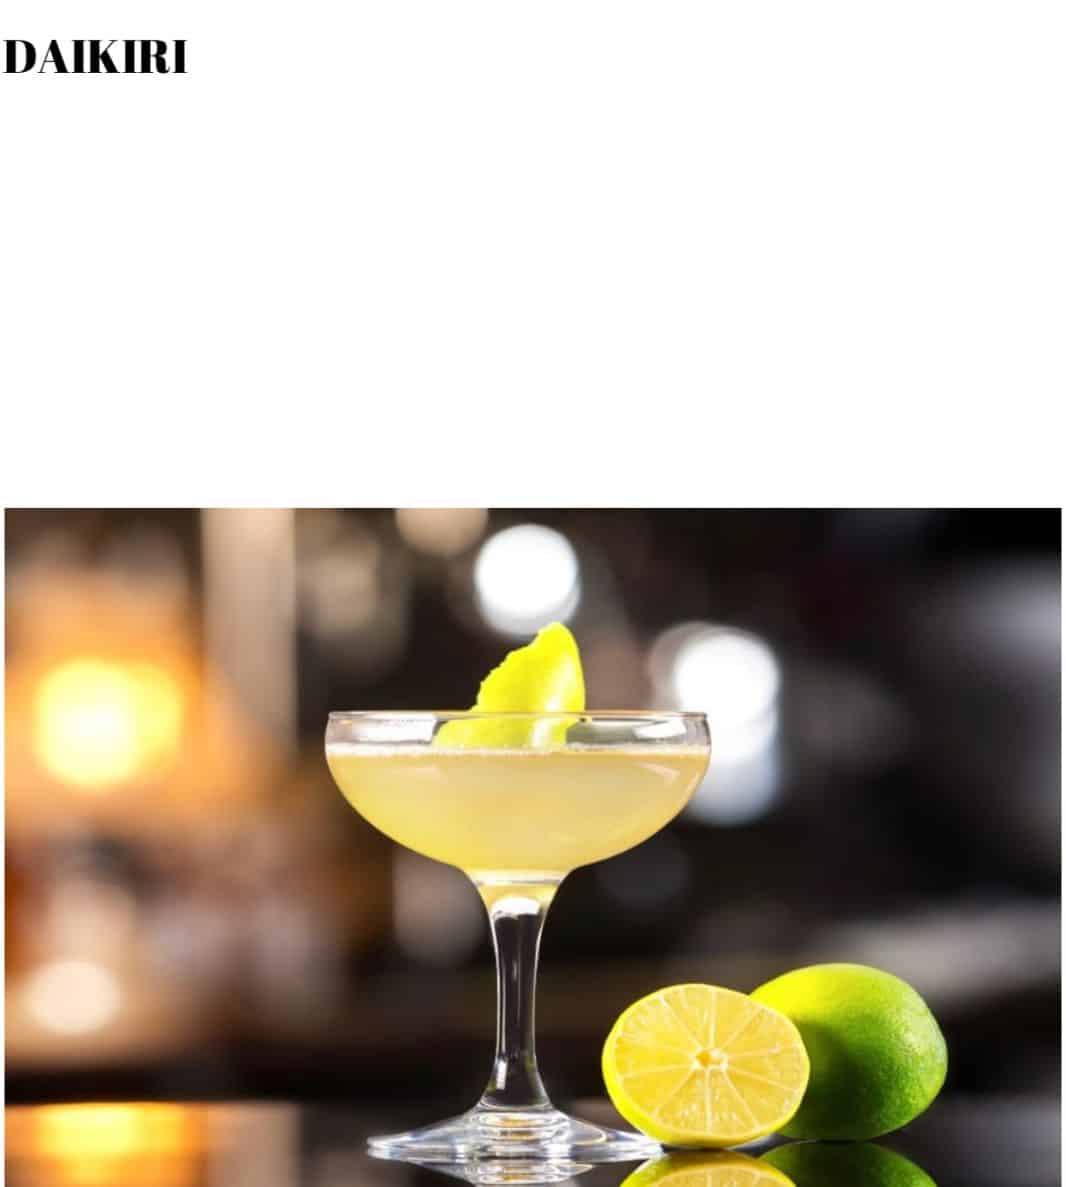 A martini glass with lime wedges in it.